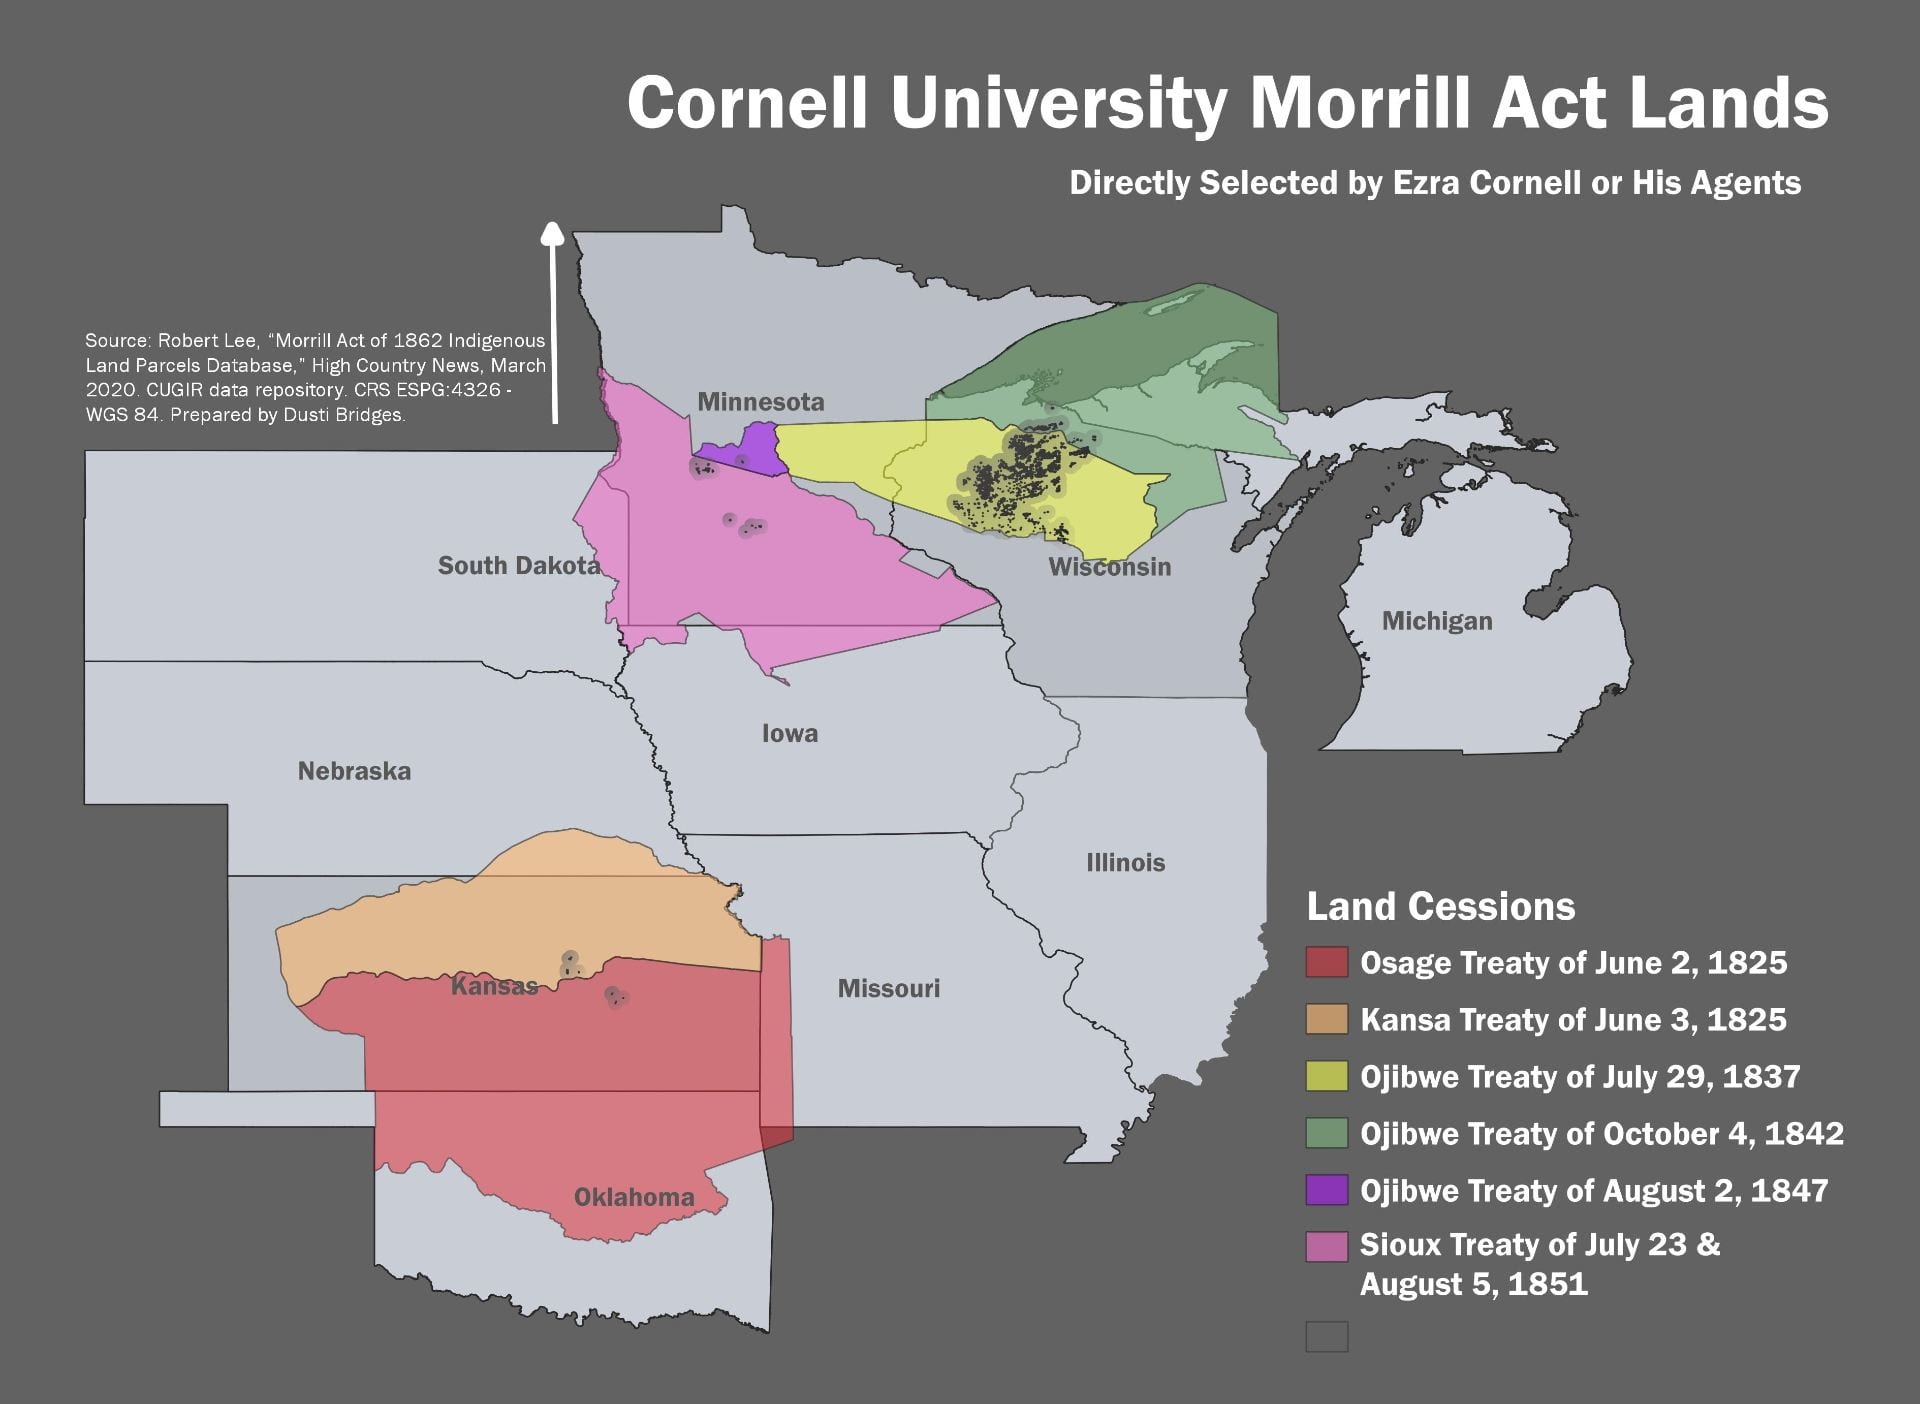 Cornell University Morrill Act Lands, Directly Selected by Ezra Cornell or His Agents (credit: Map prepared by Dusti Bridges, Department of Anthropology, Cornell University)